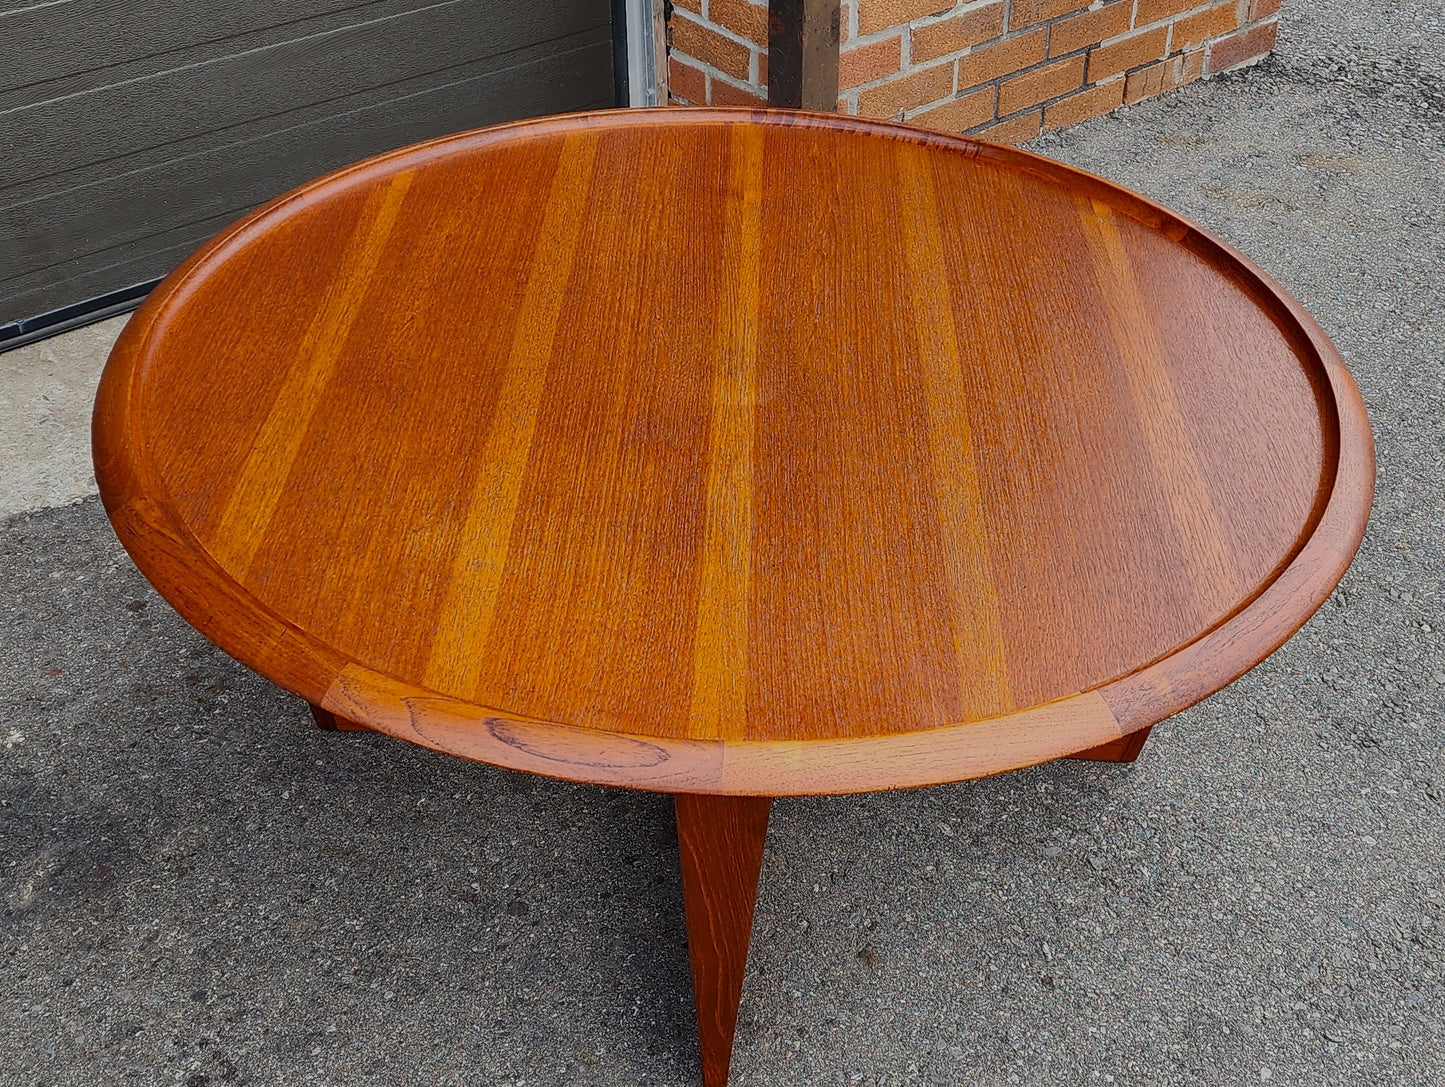 REFINISHED Mid Century Modern Round Coffee Table w Raised Edge D41"